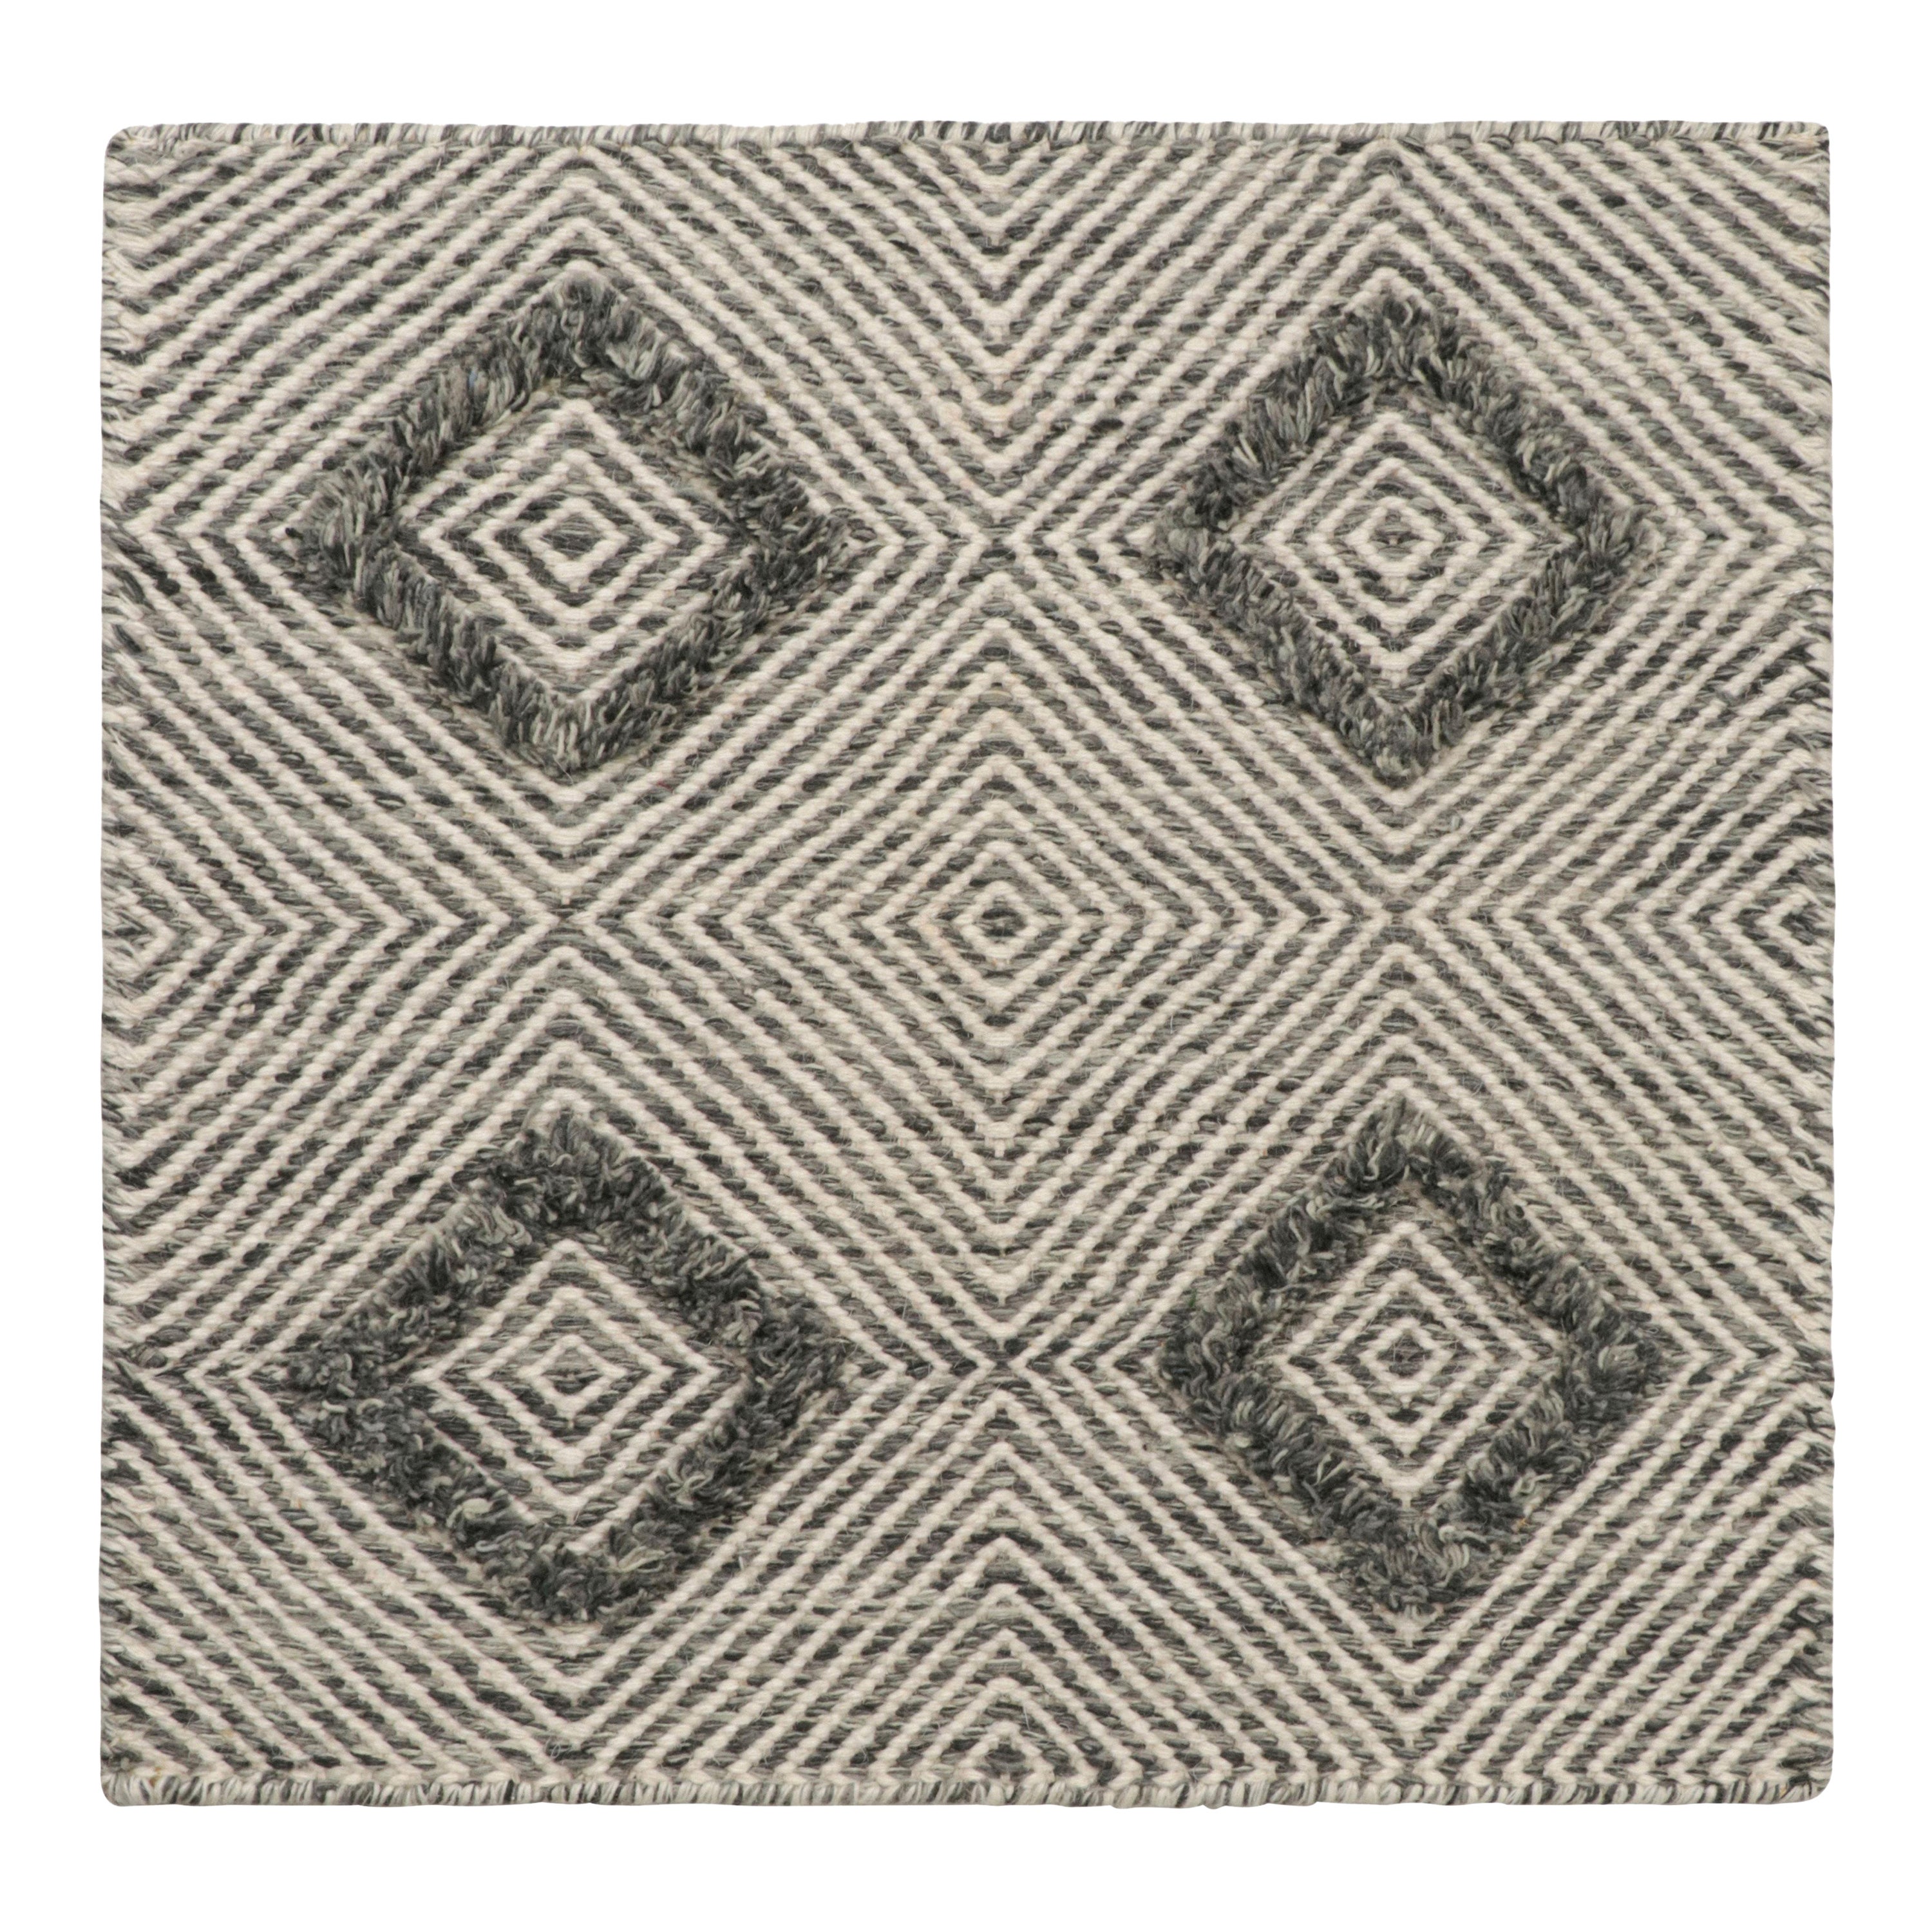 Rug & Kilim’s Contemporary Scatter Rug with White and Gray Geometric Patterns For Sale